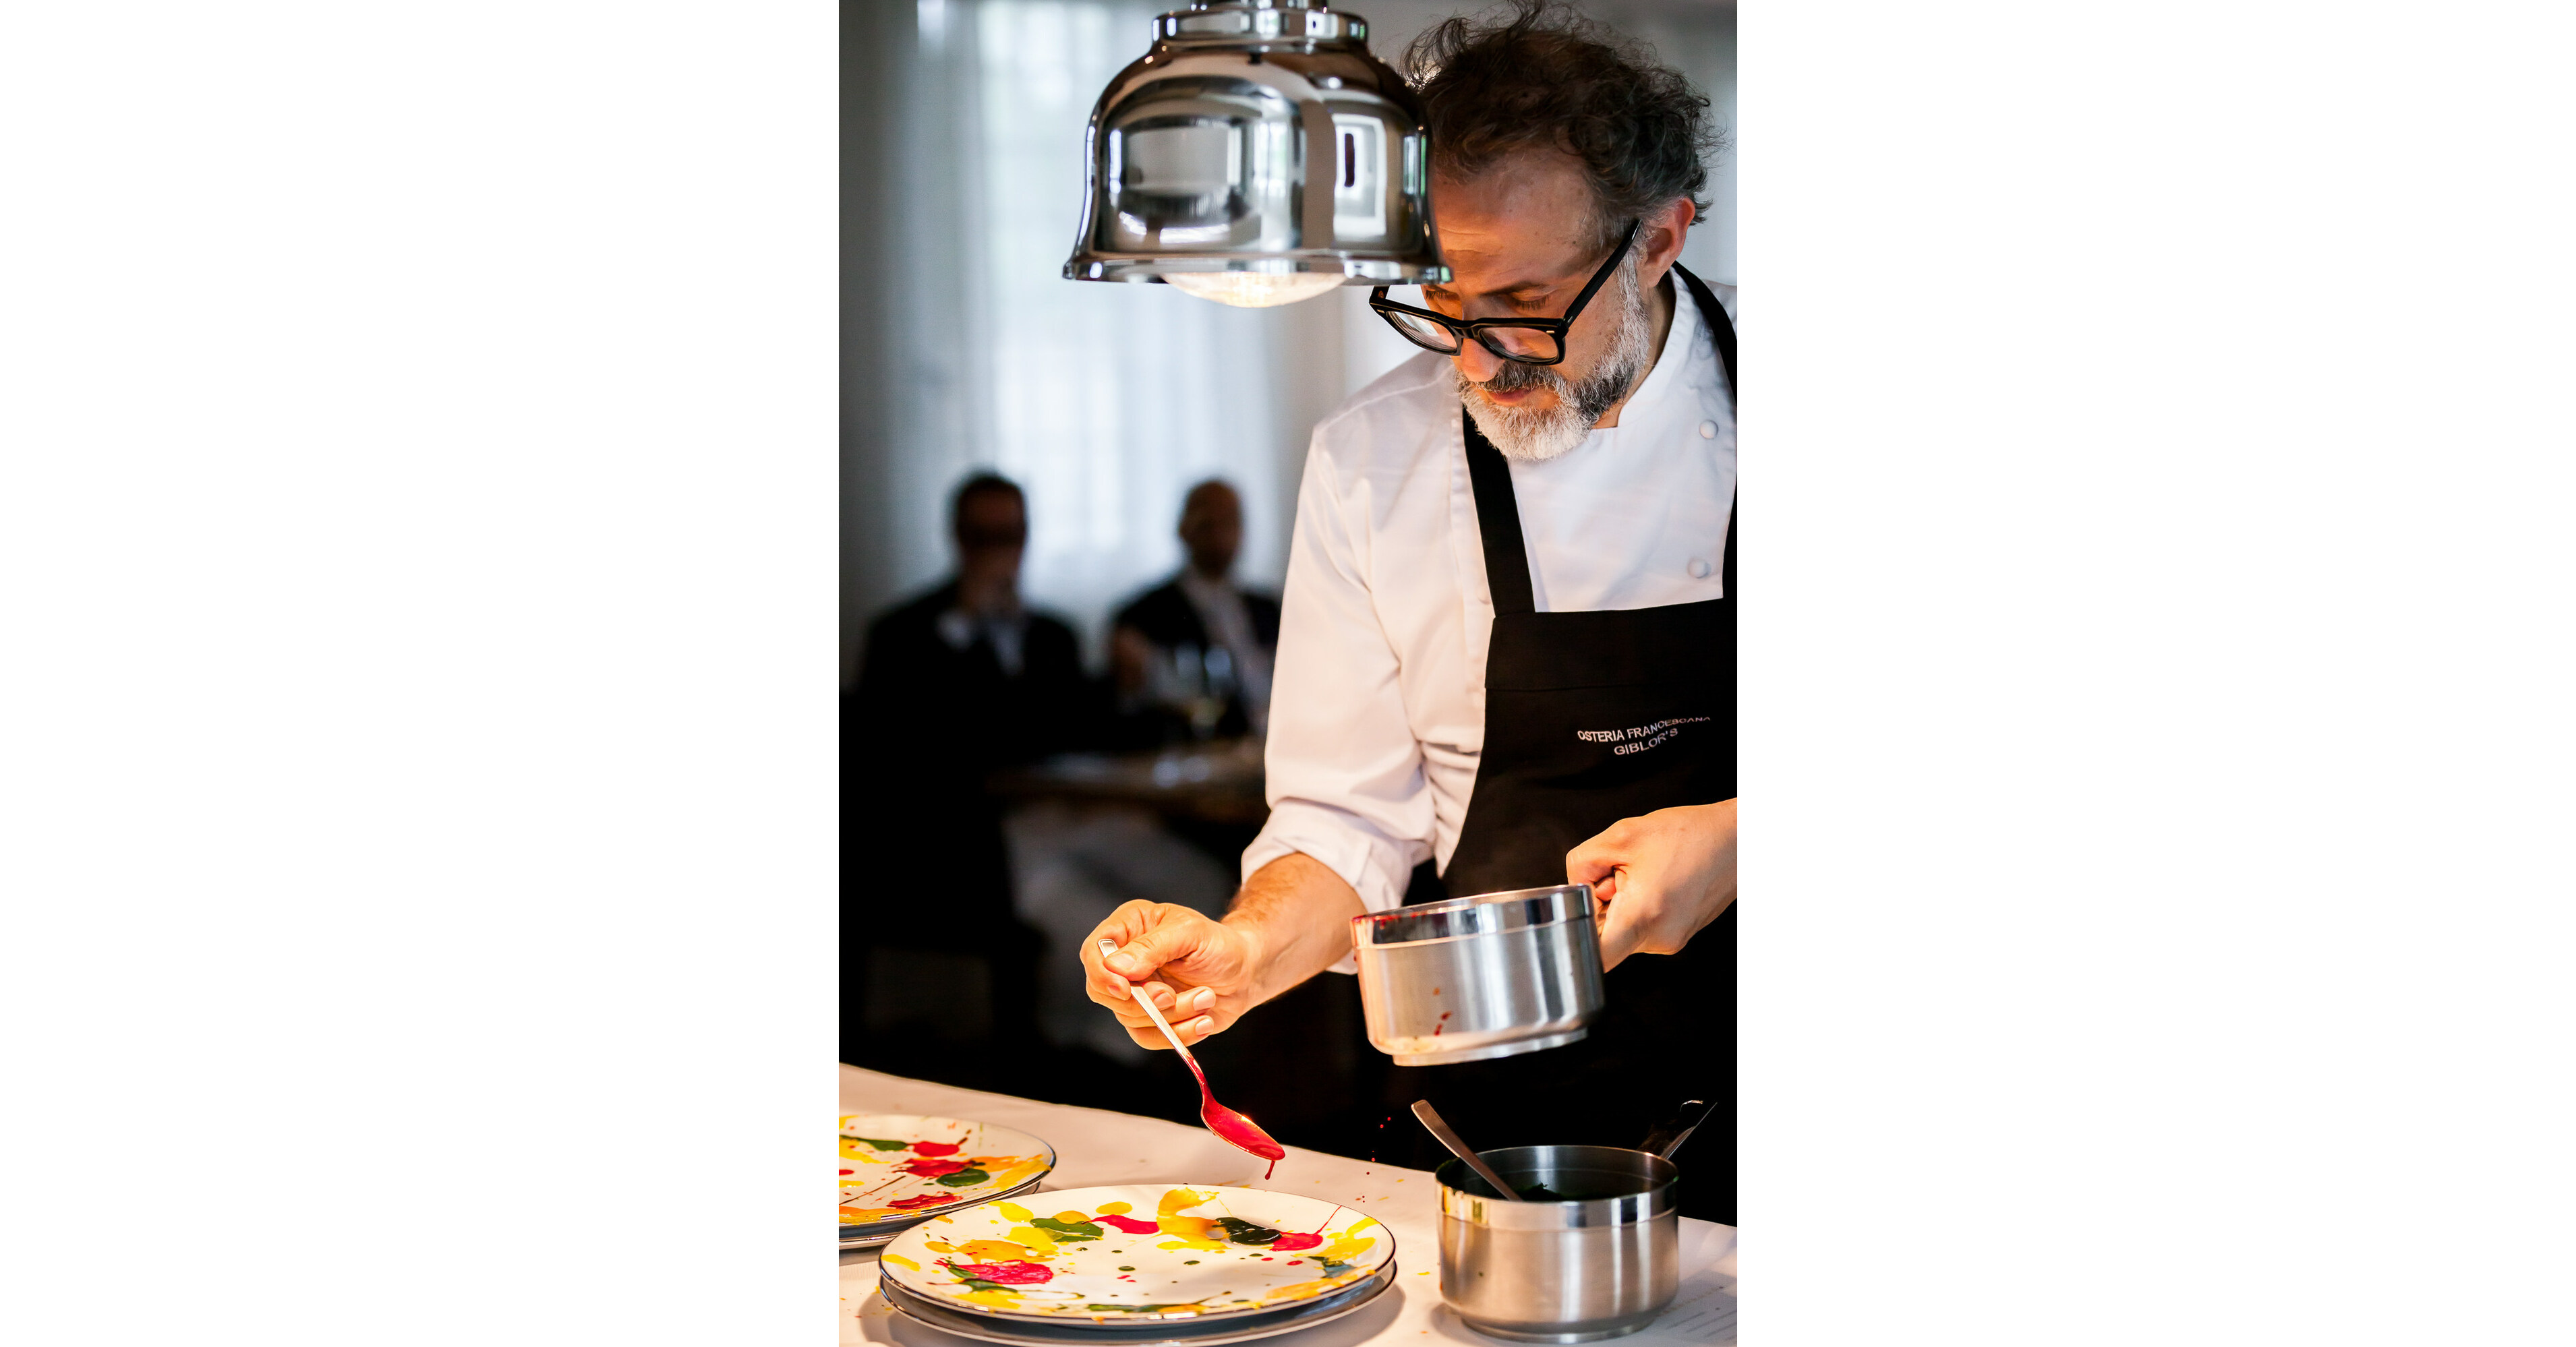 Worlds Greatest Chef Massimo Bottura Brings His Celebrated Food To Delhi For The First Time